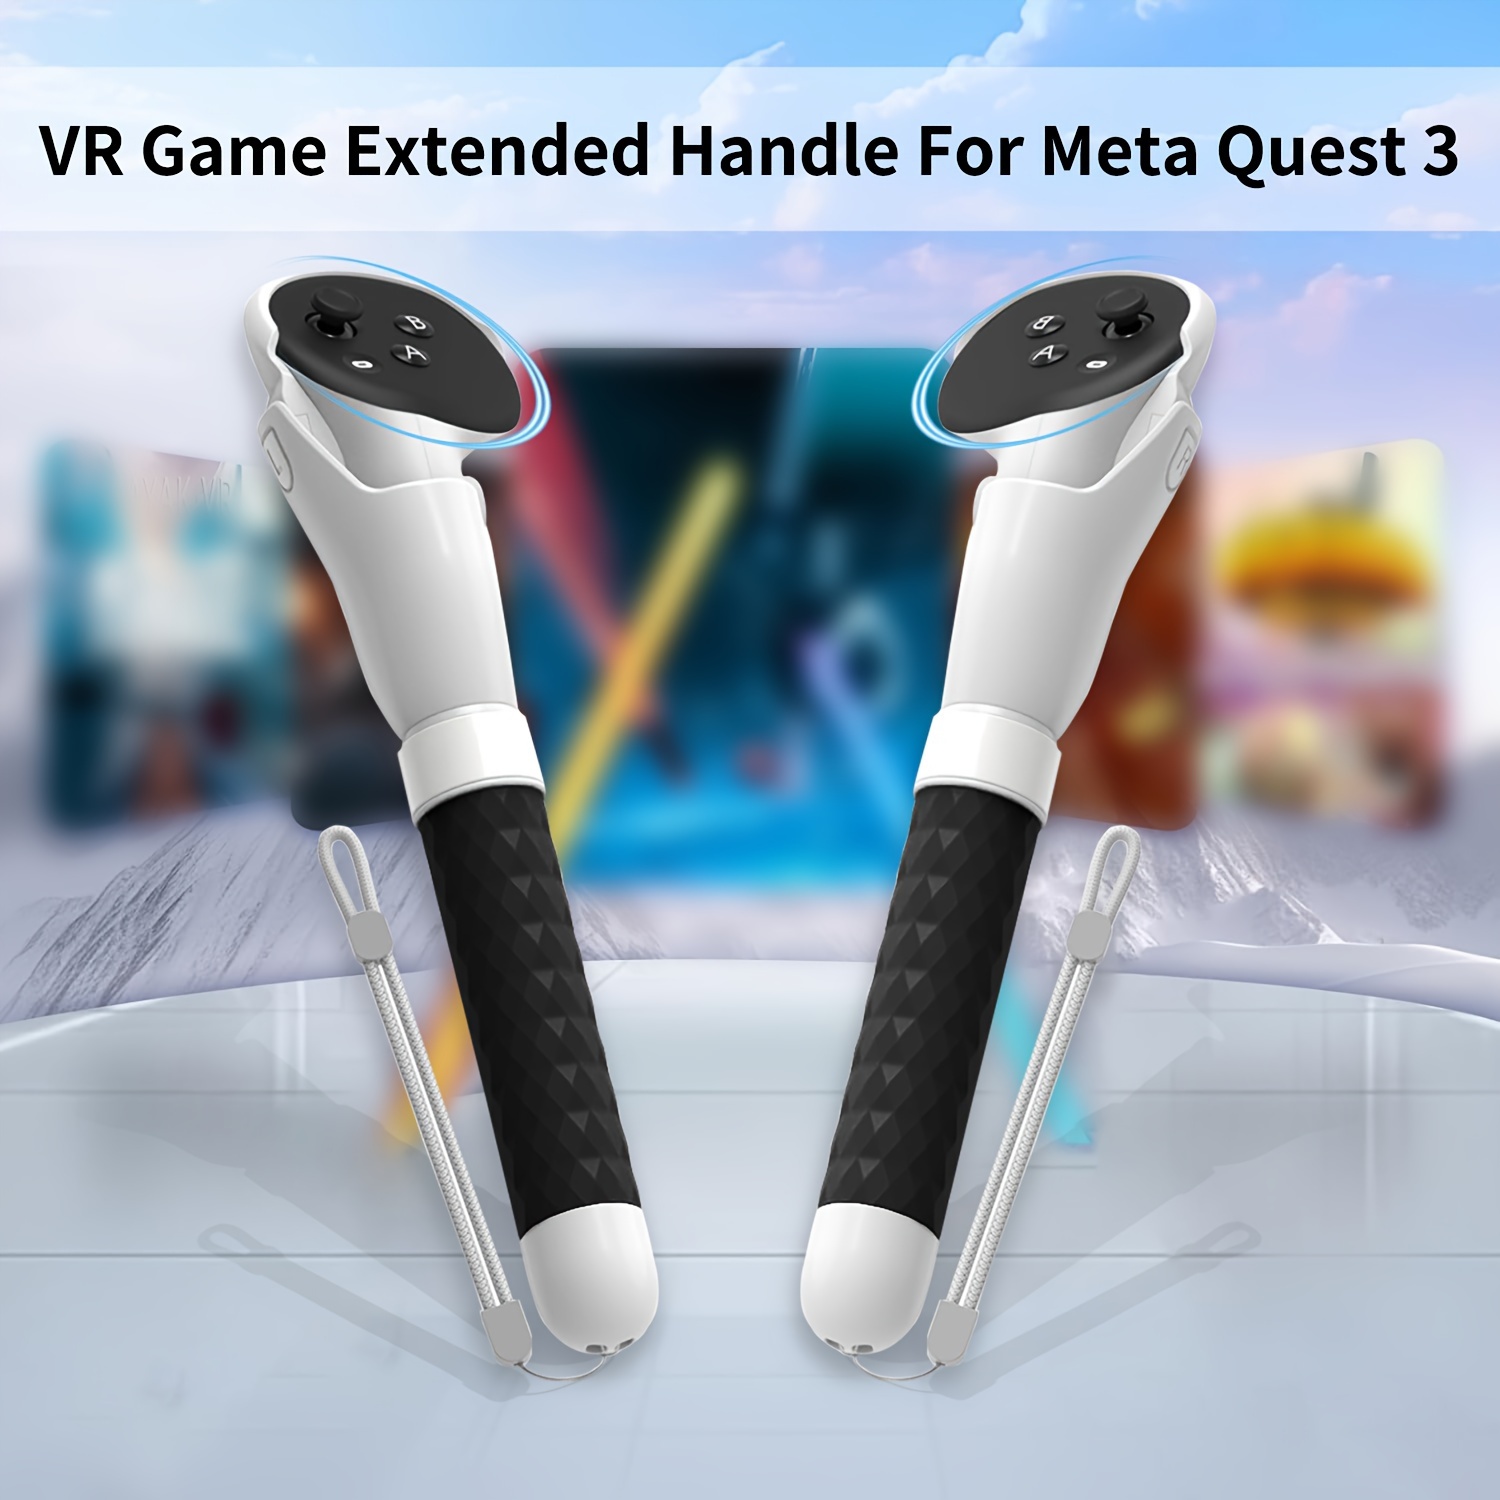  DEVASO Handle Attachments for PSVR2 Controller Accessories,  Beat Saber Walkabout Mini Golf Drums Rock Extension Grip for Playstation VR2,  VR Game Handle Accessories Compatible with PS VR2 : Video Games